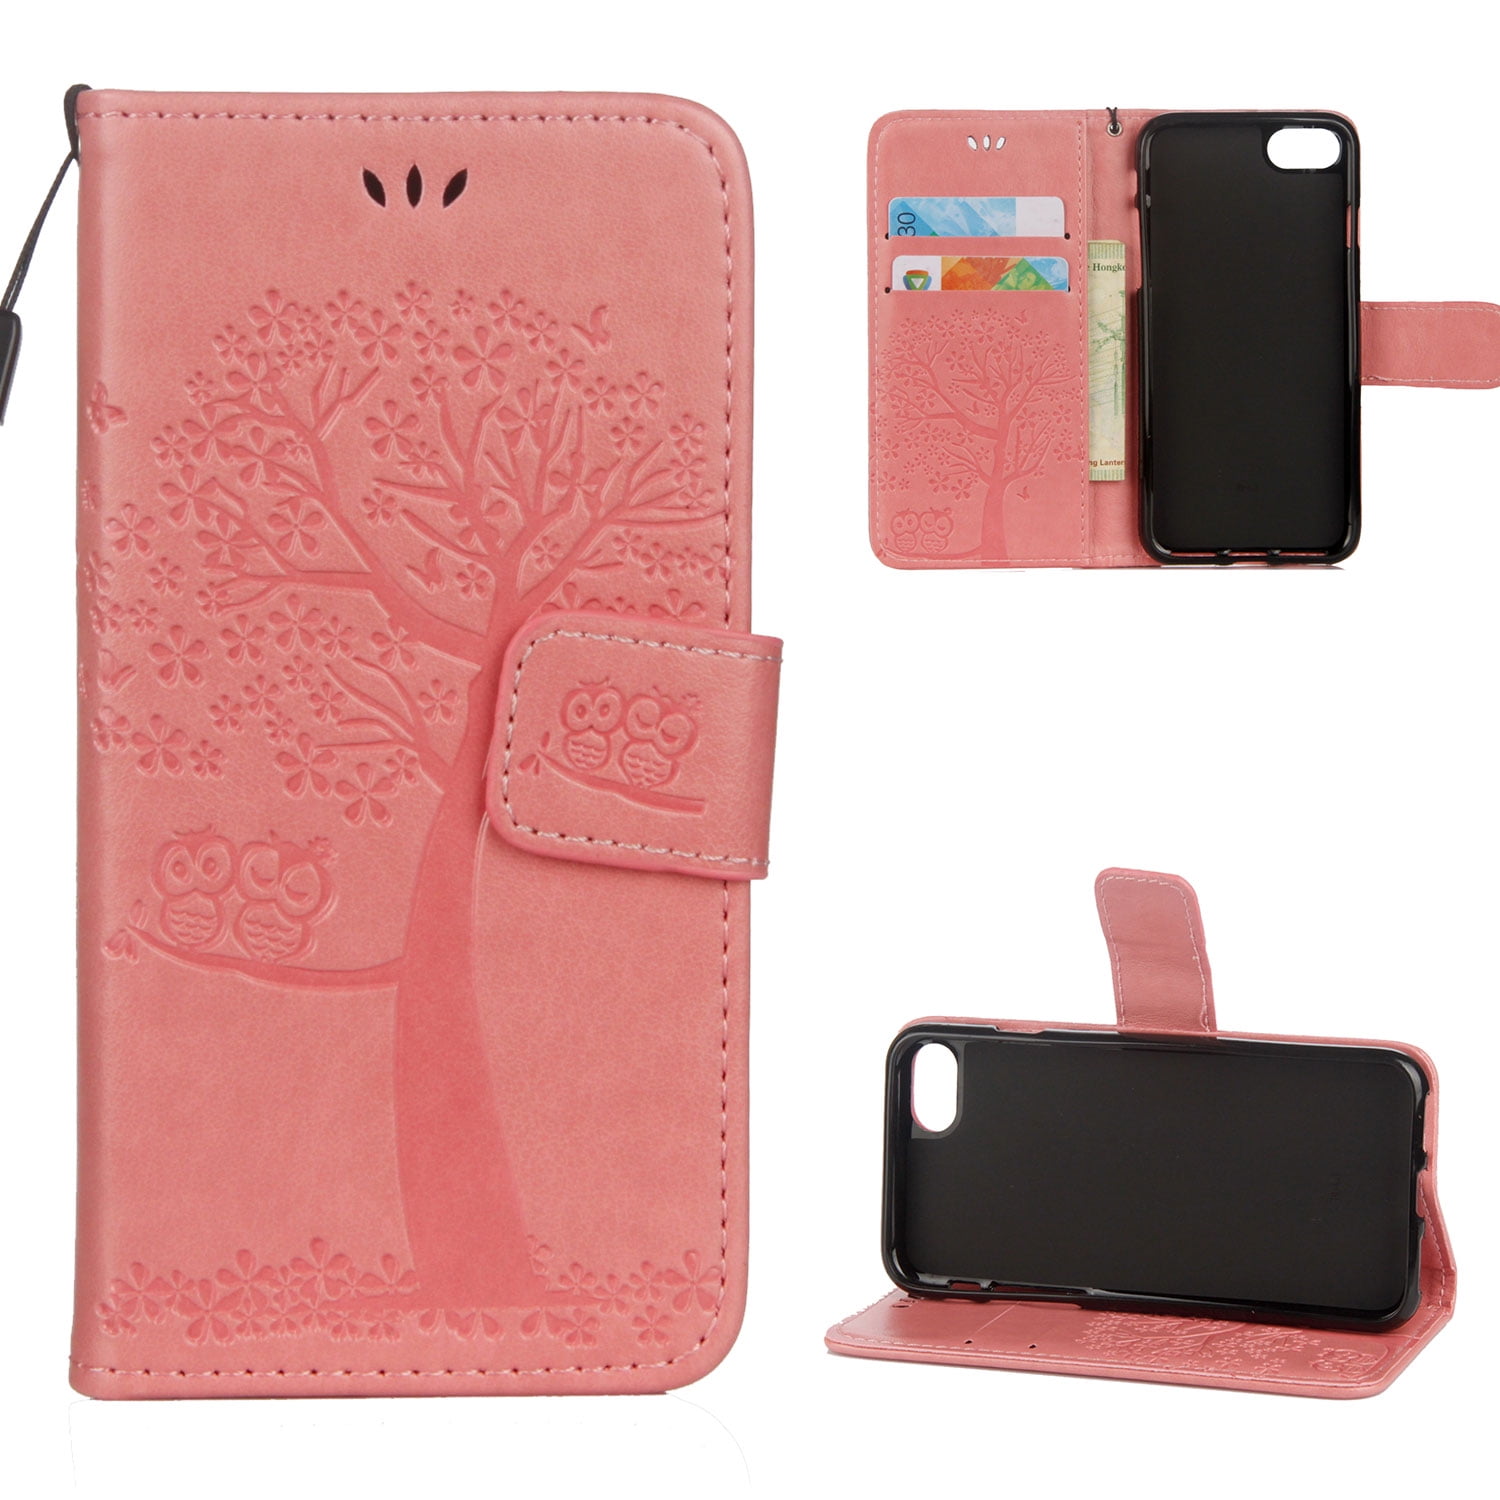 Leather Case, case, Retro Owl 8 Style Embossed for Apple Pink Wallet 7 Case iPhone Tree Pretty 7 Allytech and PU Book iPhone Cover Flip 8, iPhone iPhone Design Wallet